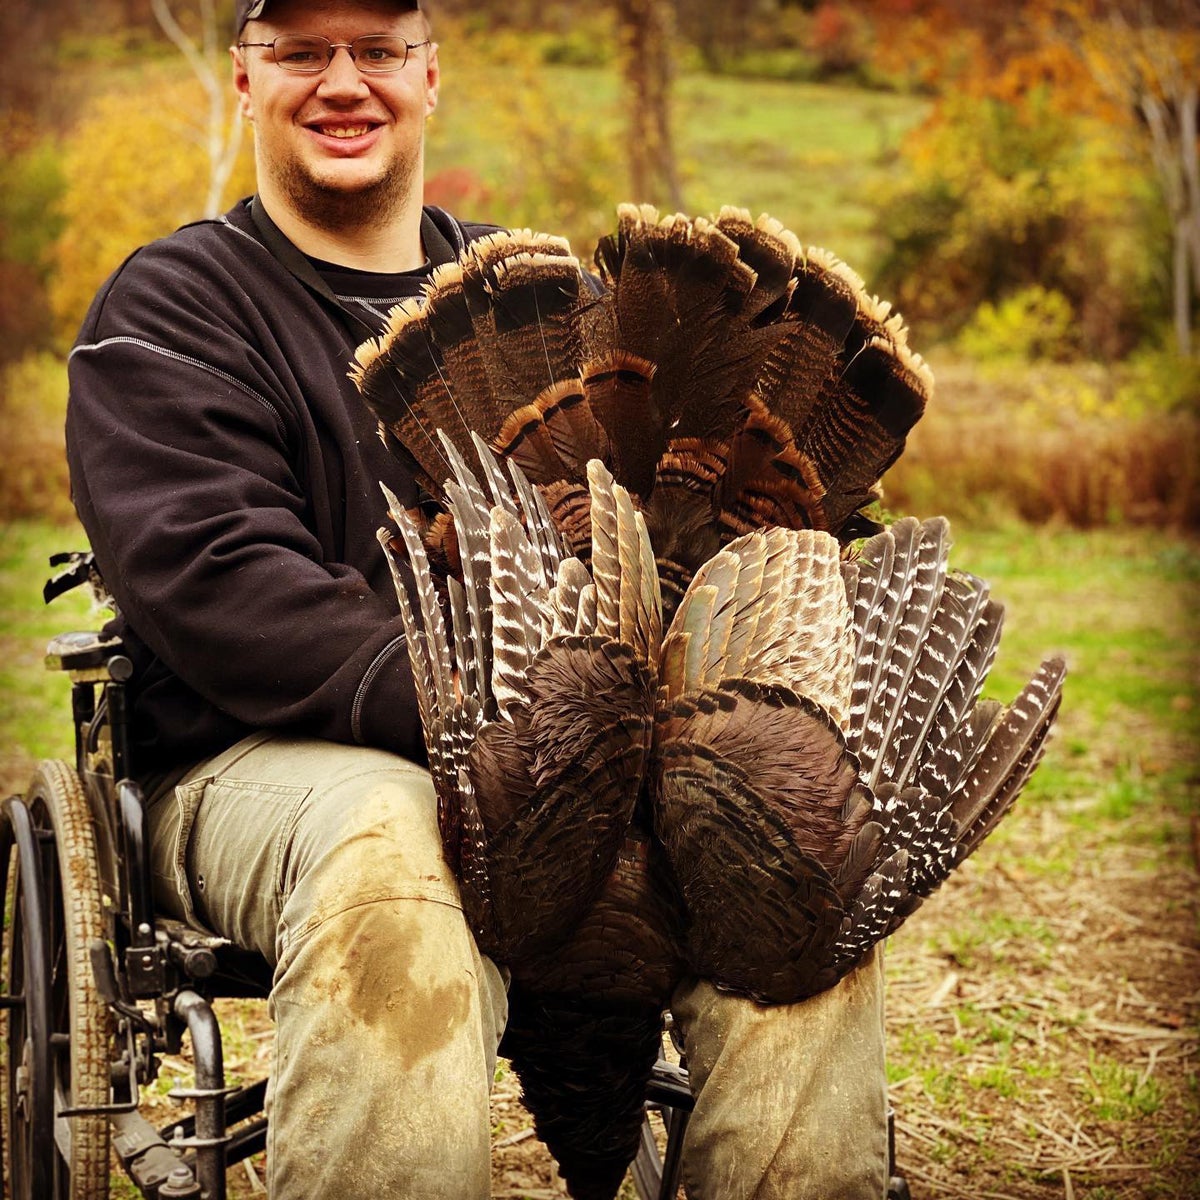 Chris hall is a disabled hunter -- with emphasis on 'hunter.'